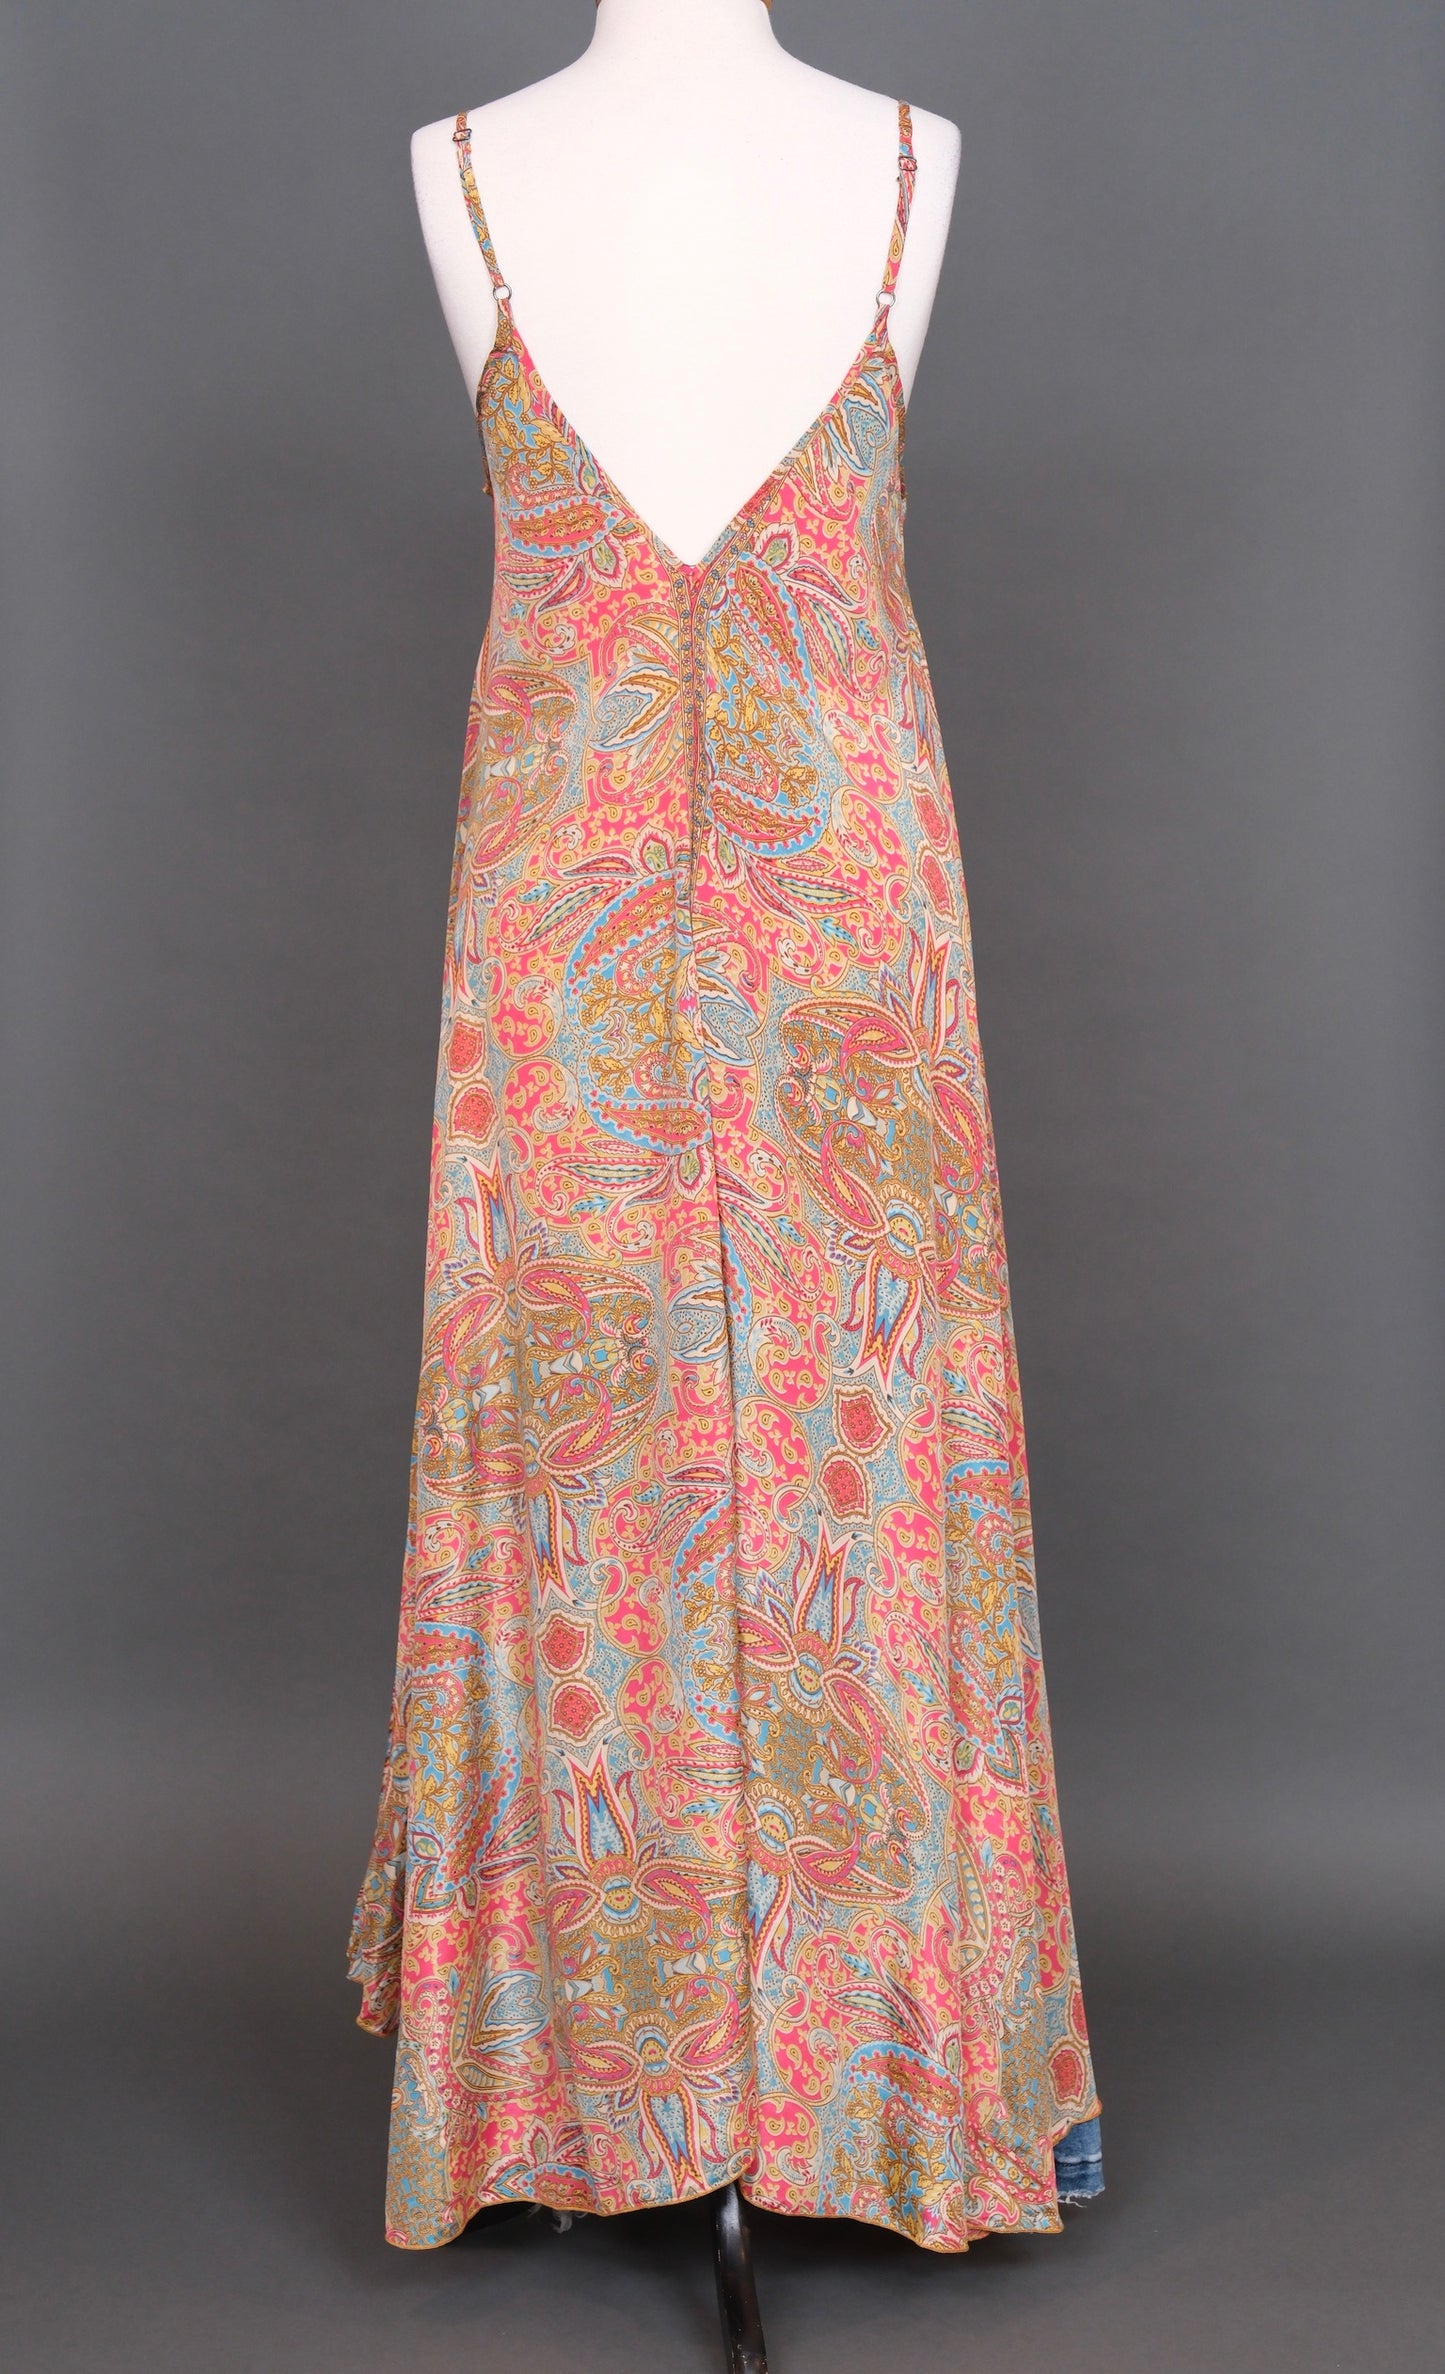 La Mer Scarf Dress in Coral Paisley